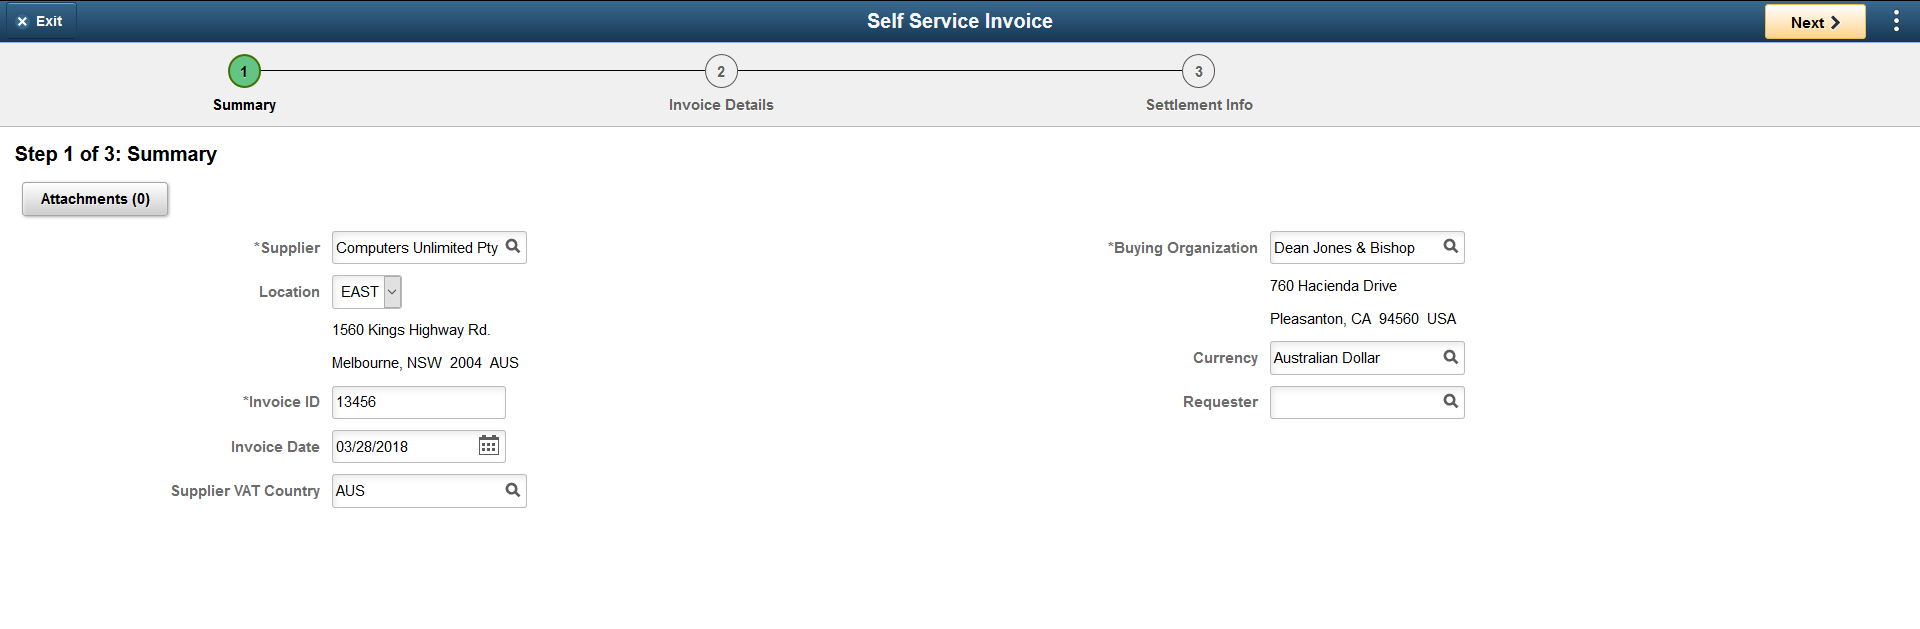 Self Service Invoice-Create Invoice page as displayed on a Desktop ( 1 of 3)